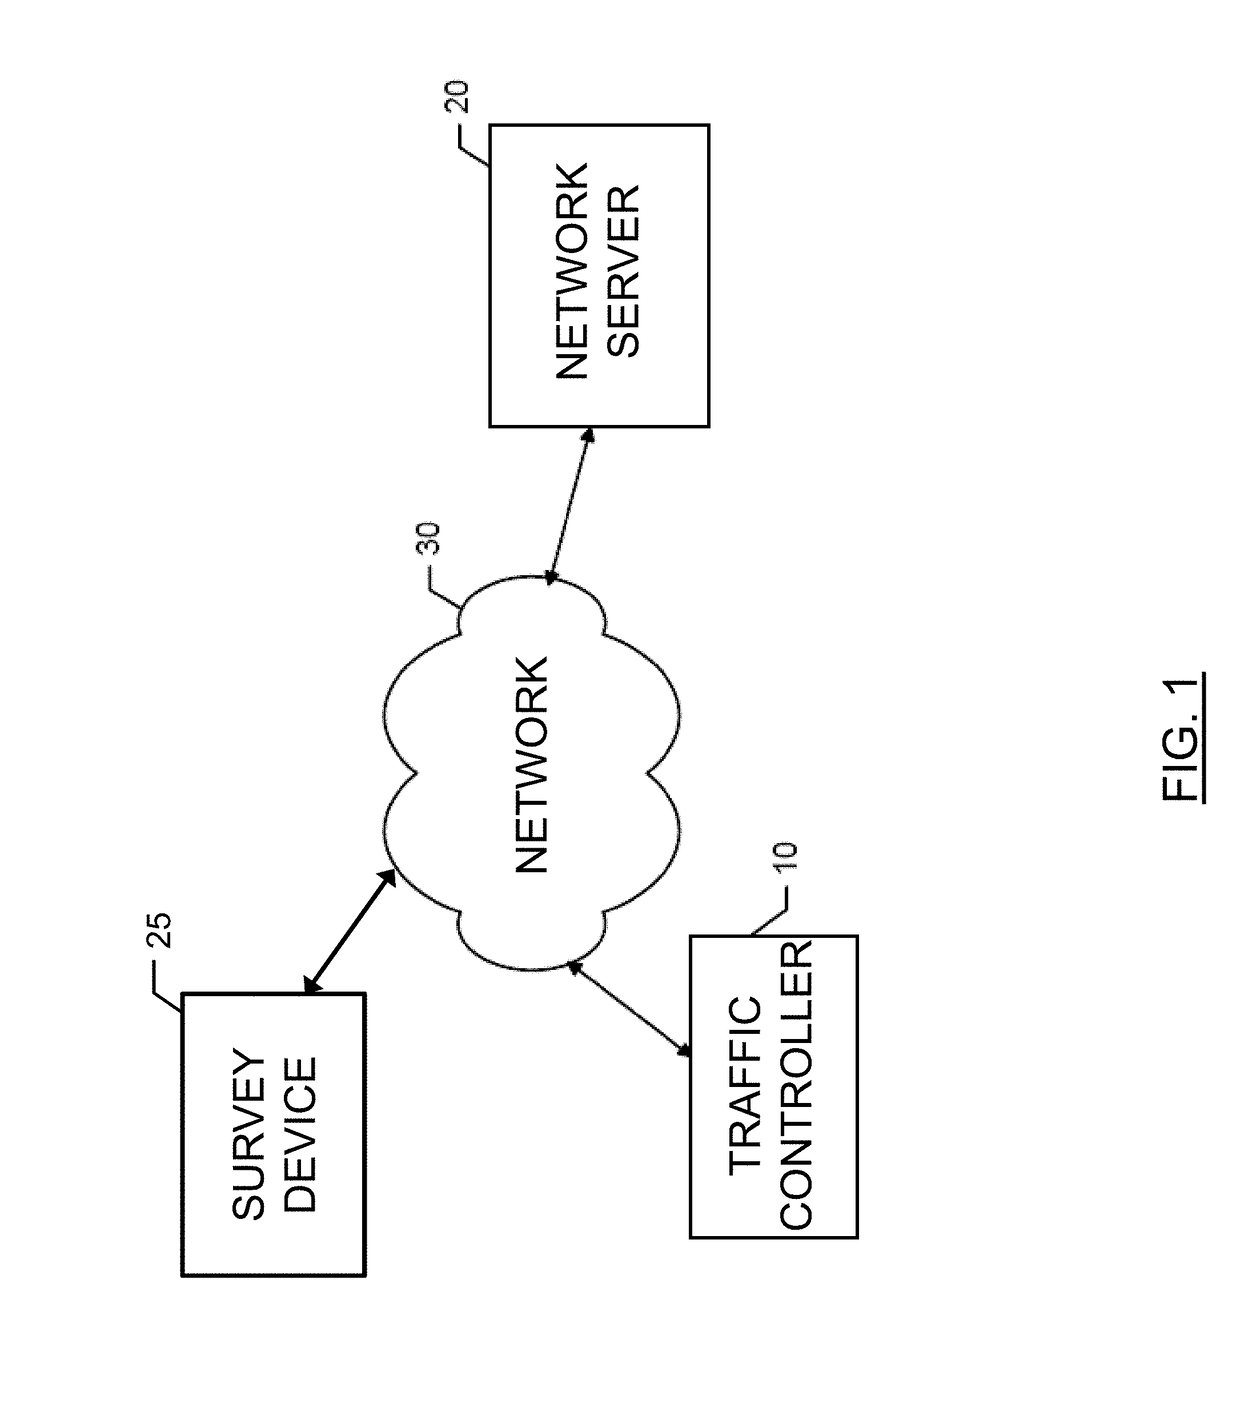 Method, apparatus and computer program product for indexing traffic lanes for signal control and traffic flow management